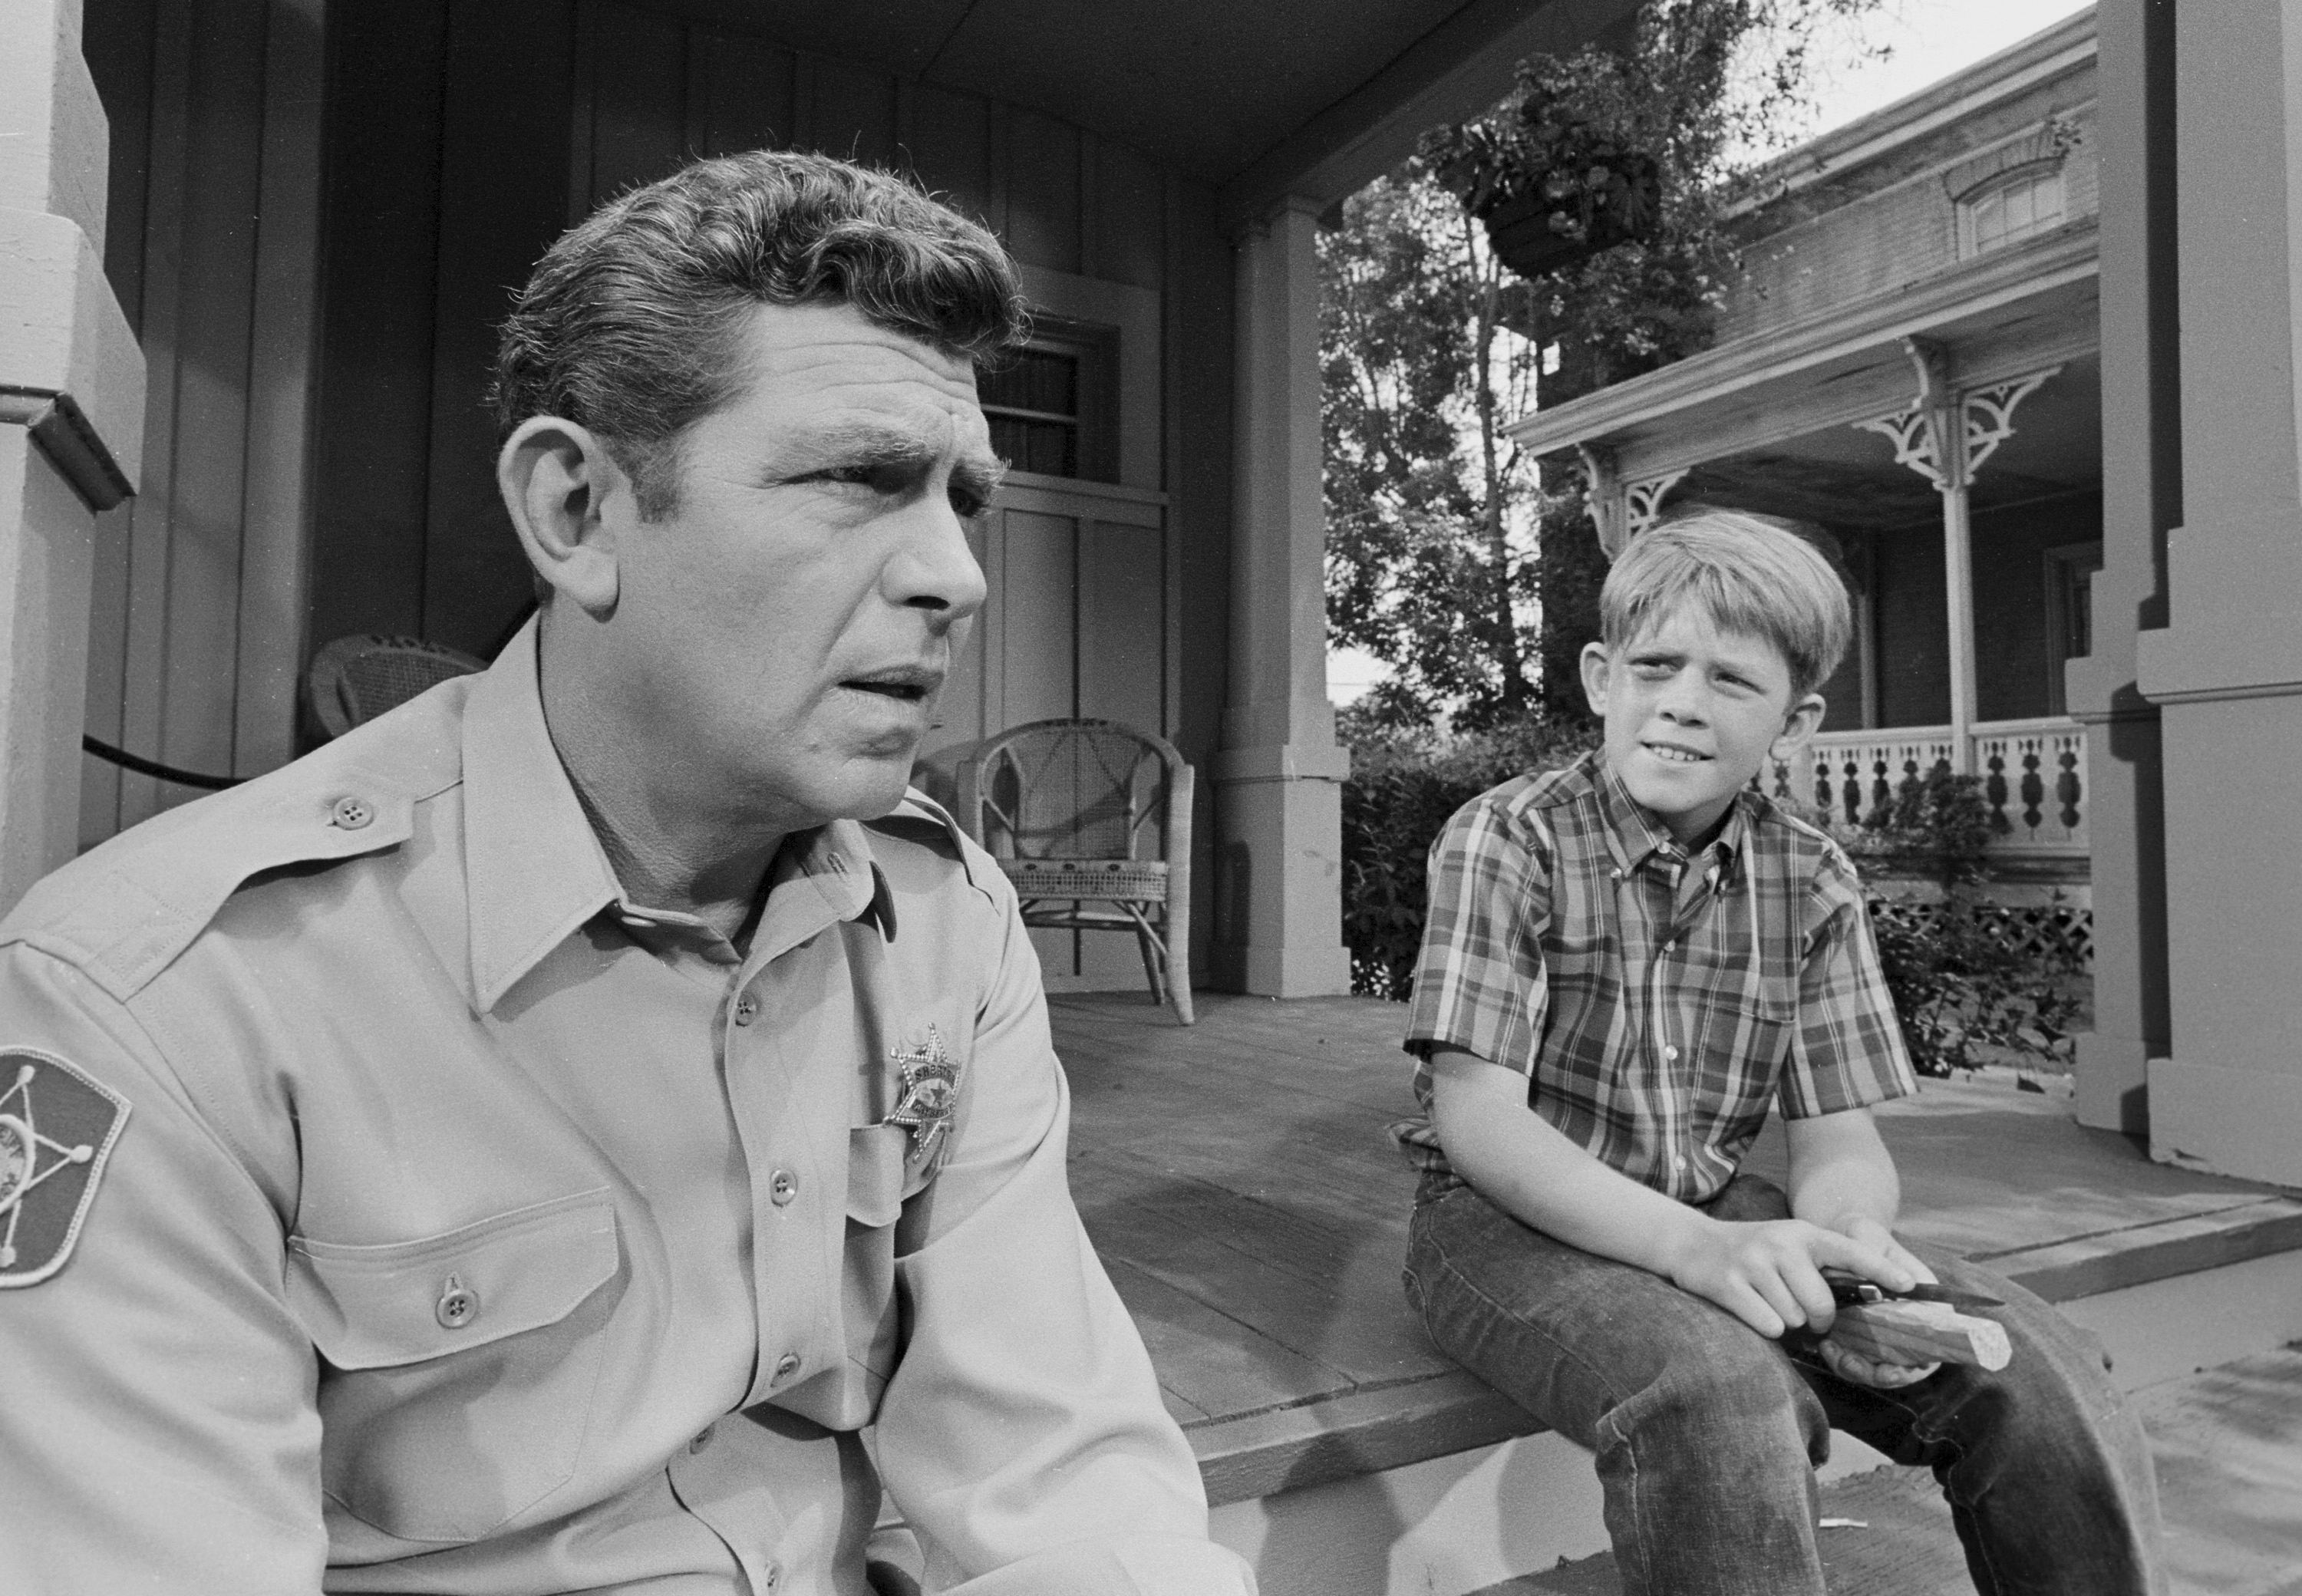 Andy Griffith and Ron Howard on a porch